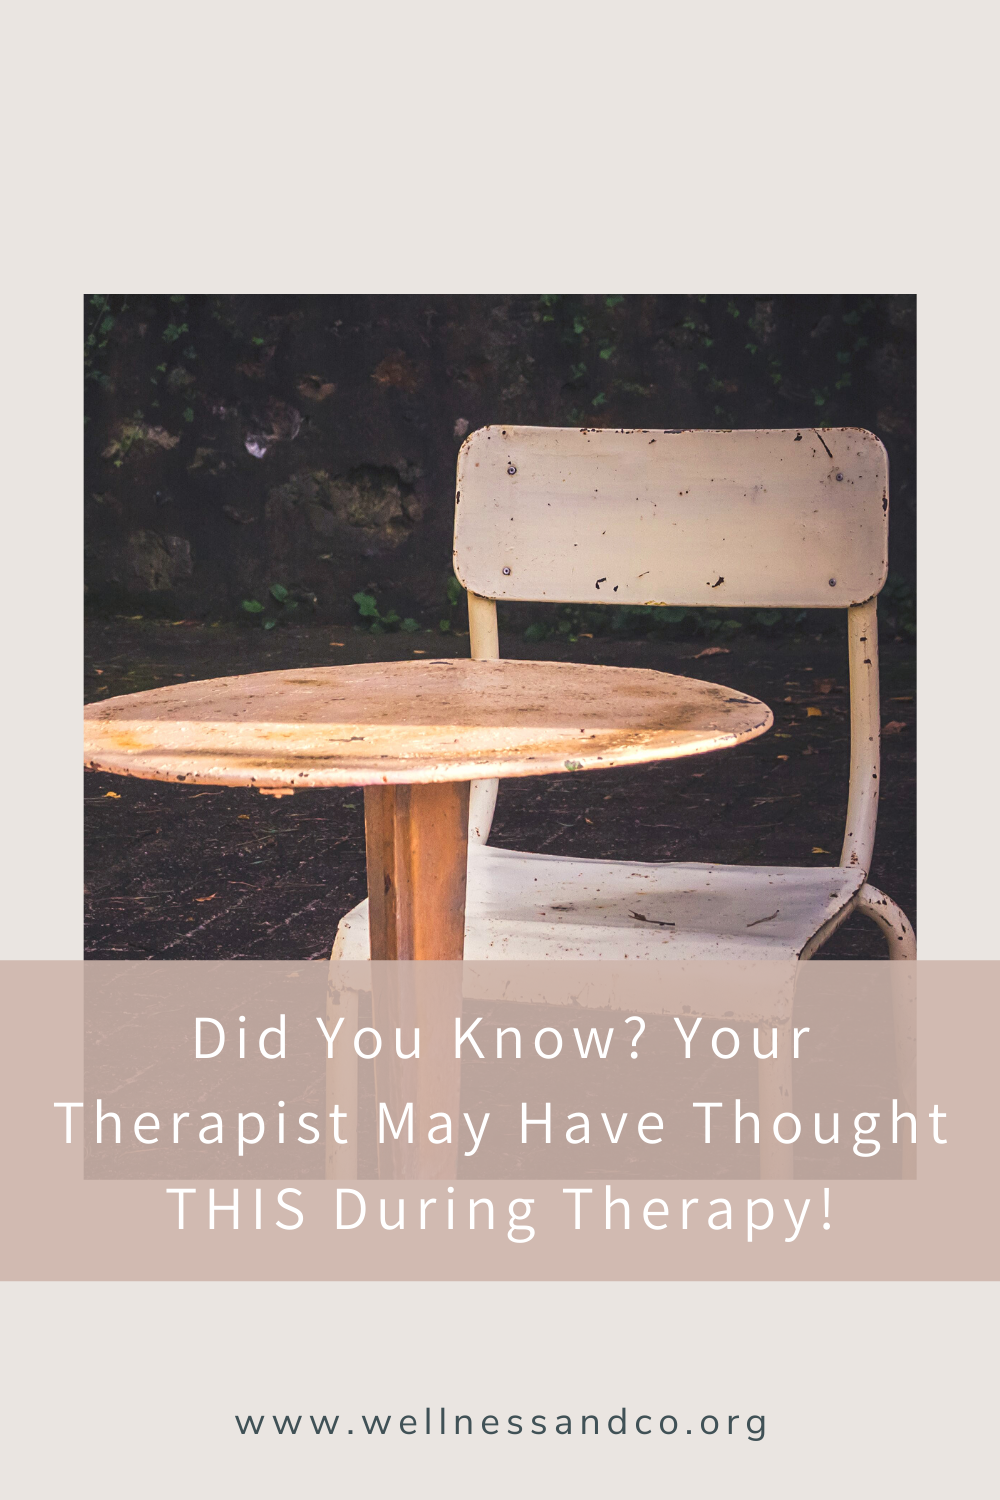 Did You Know? Your Therapist May Have Thought THIS During Therapy! | The boundaries and ethics between therapists and clients are key. This post gives a look, through poem form, into an ethical challenge that many therapists experience when there is a strong connection with a client.